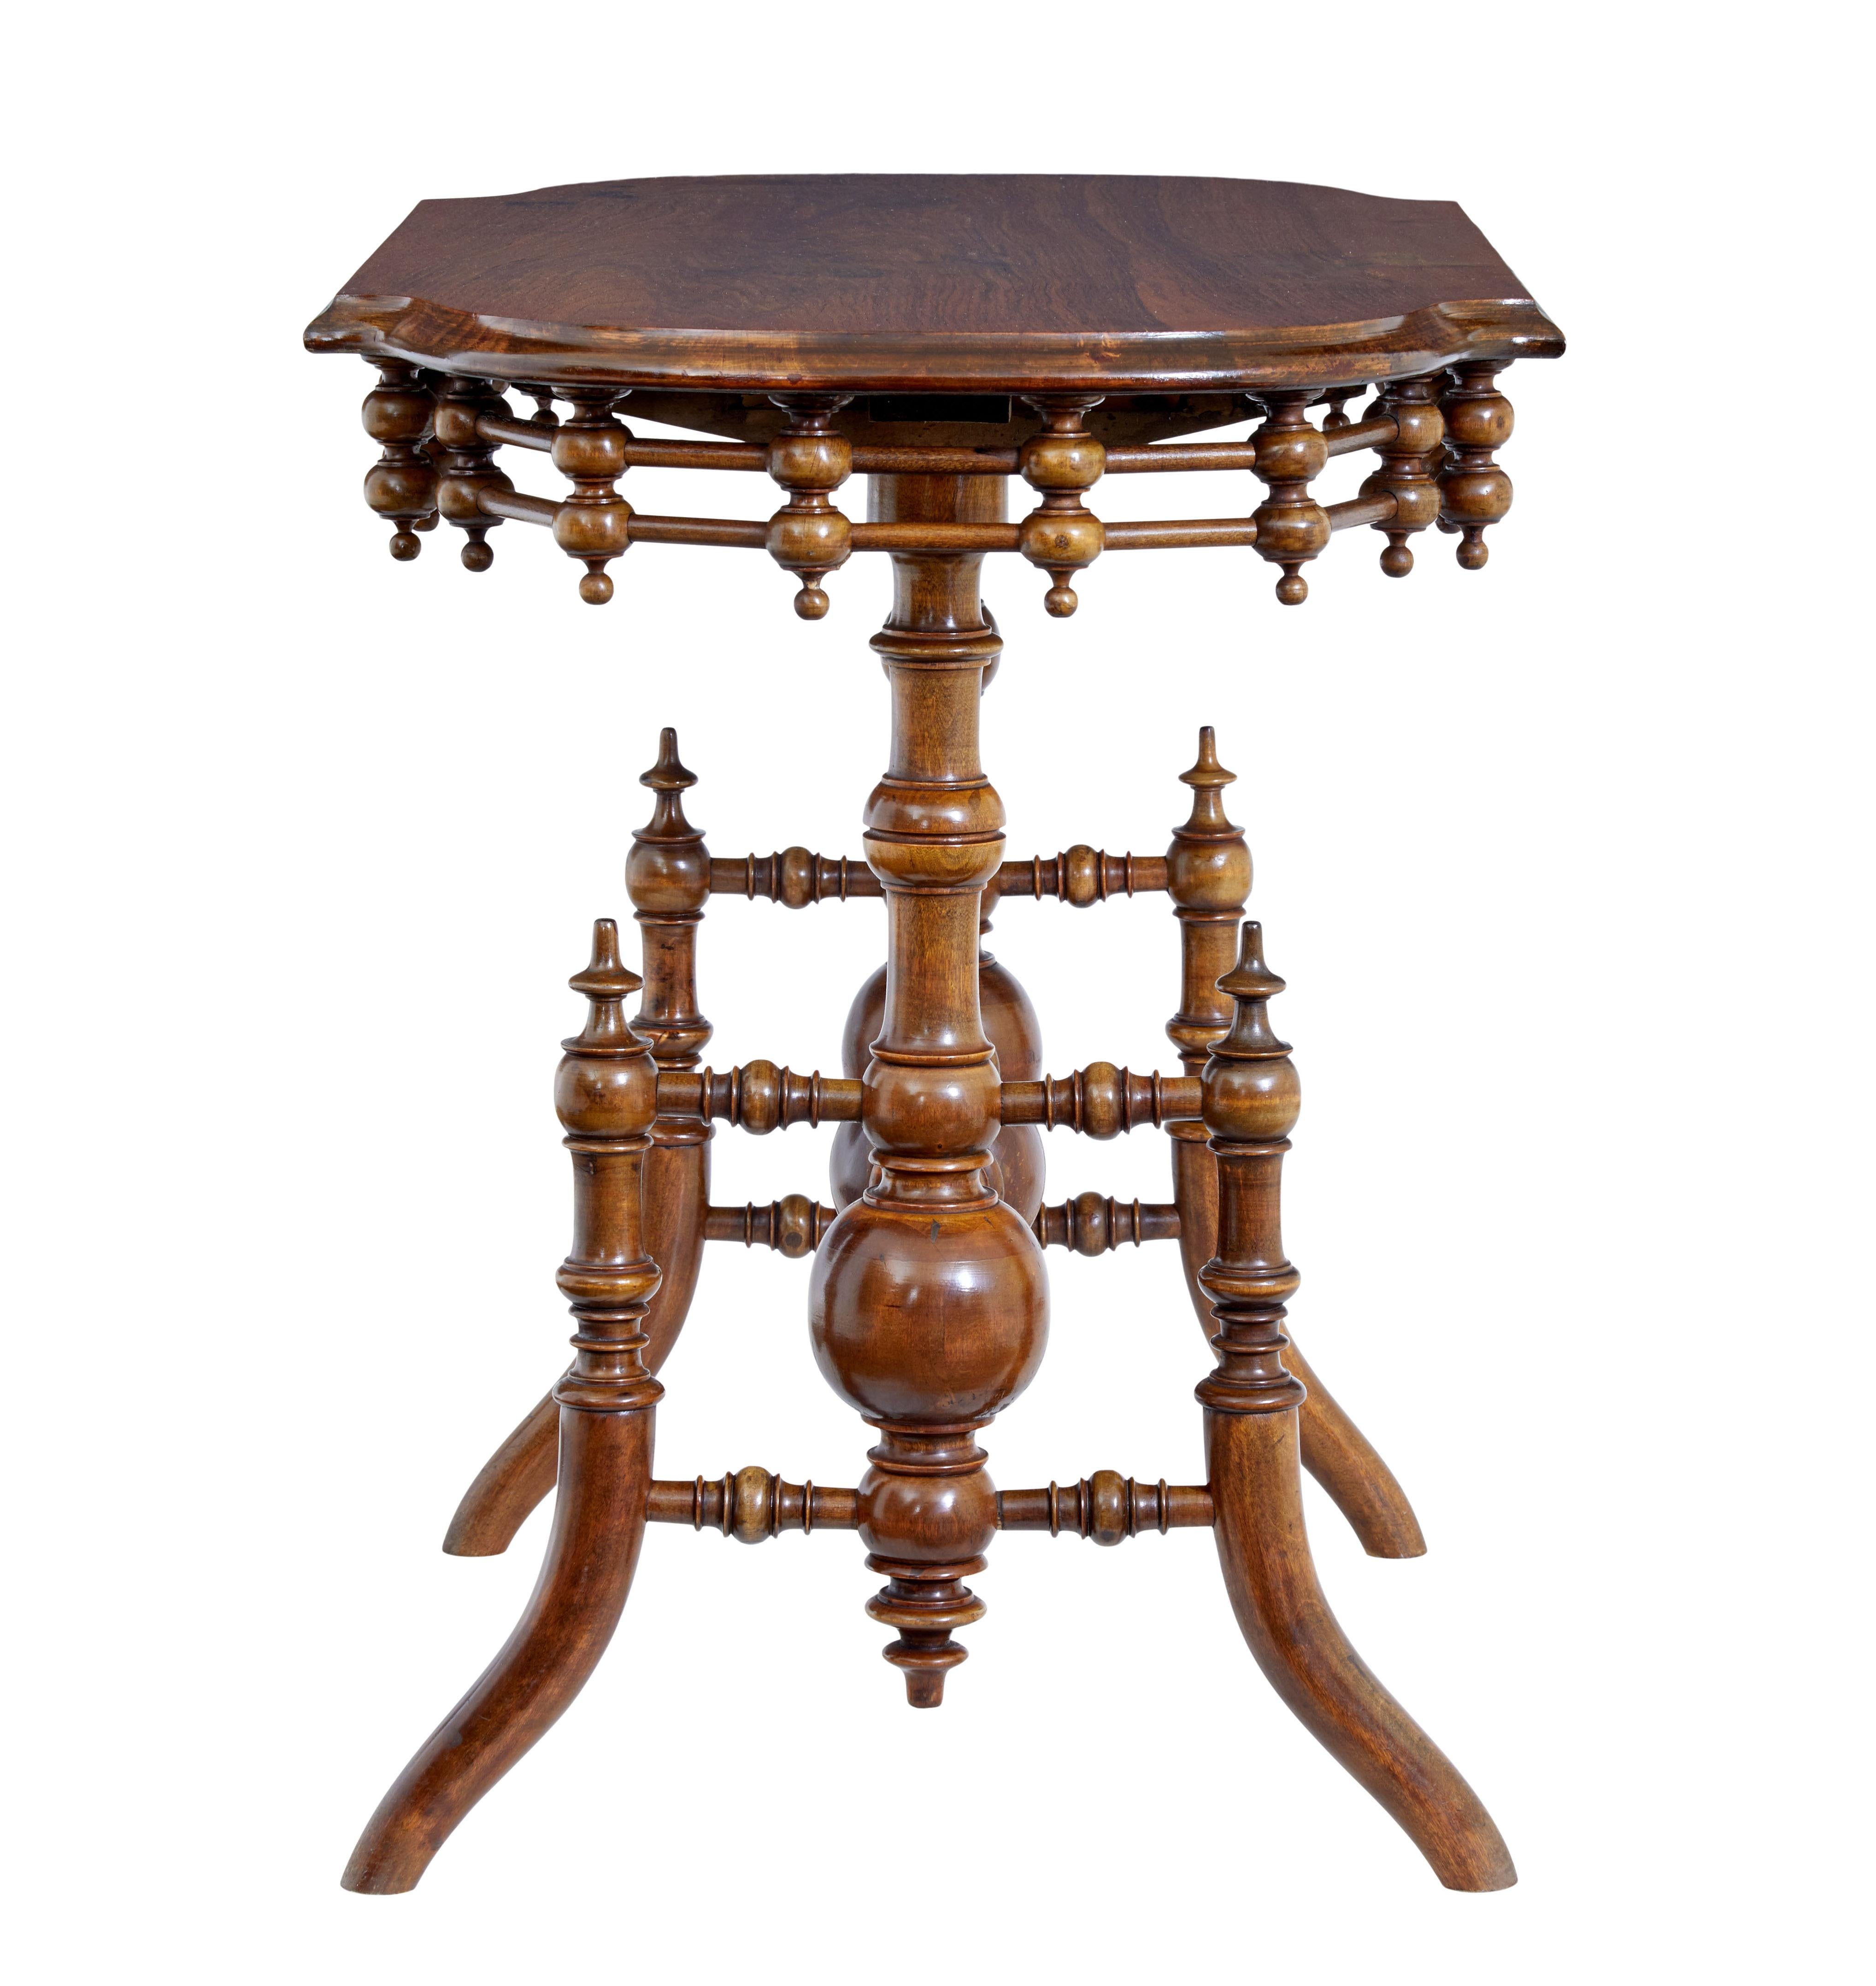 Carved 19th Century aesthetic movement walnut table